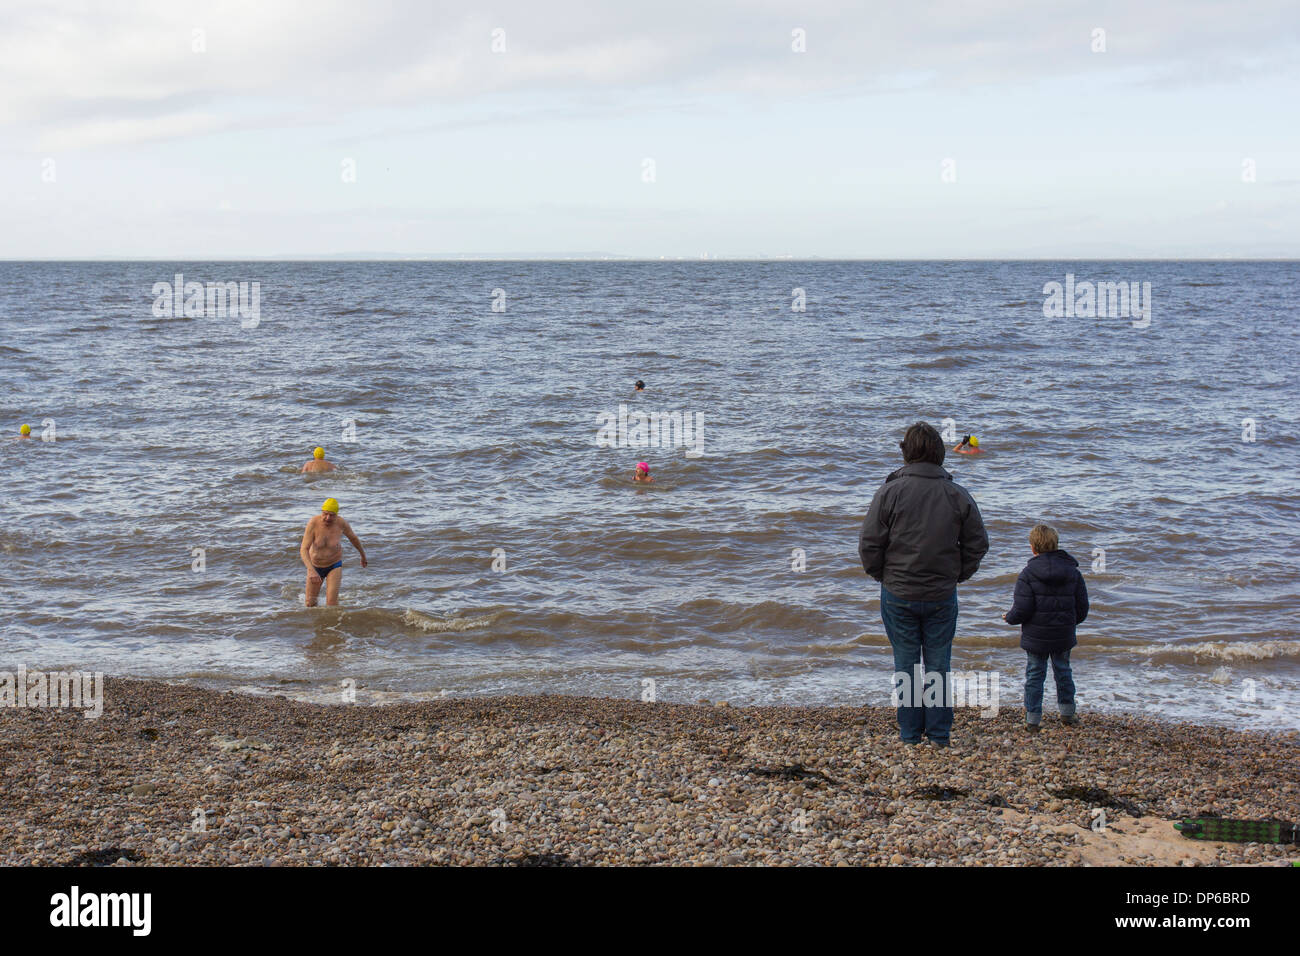 Man and boy watching people swimming in the sea in winter Stock Photo